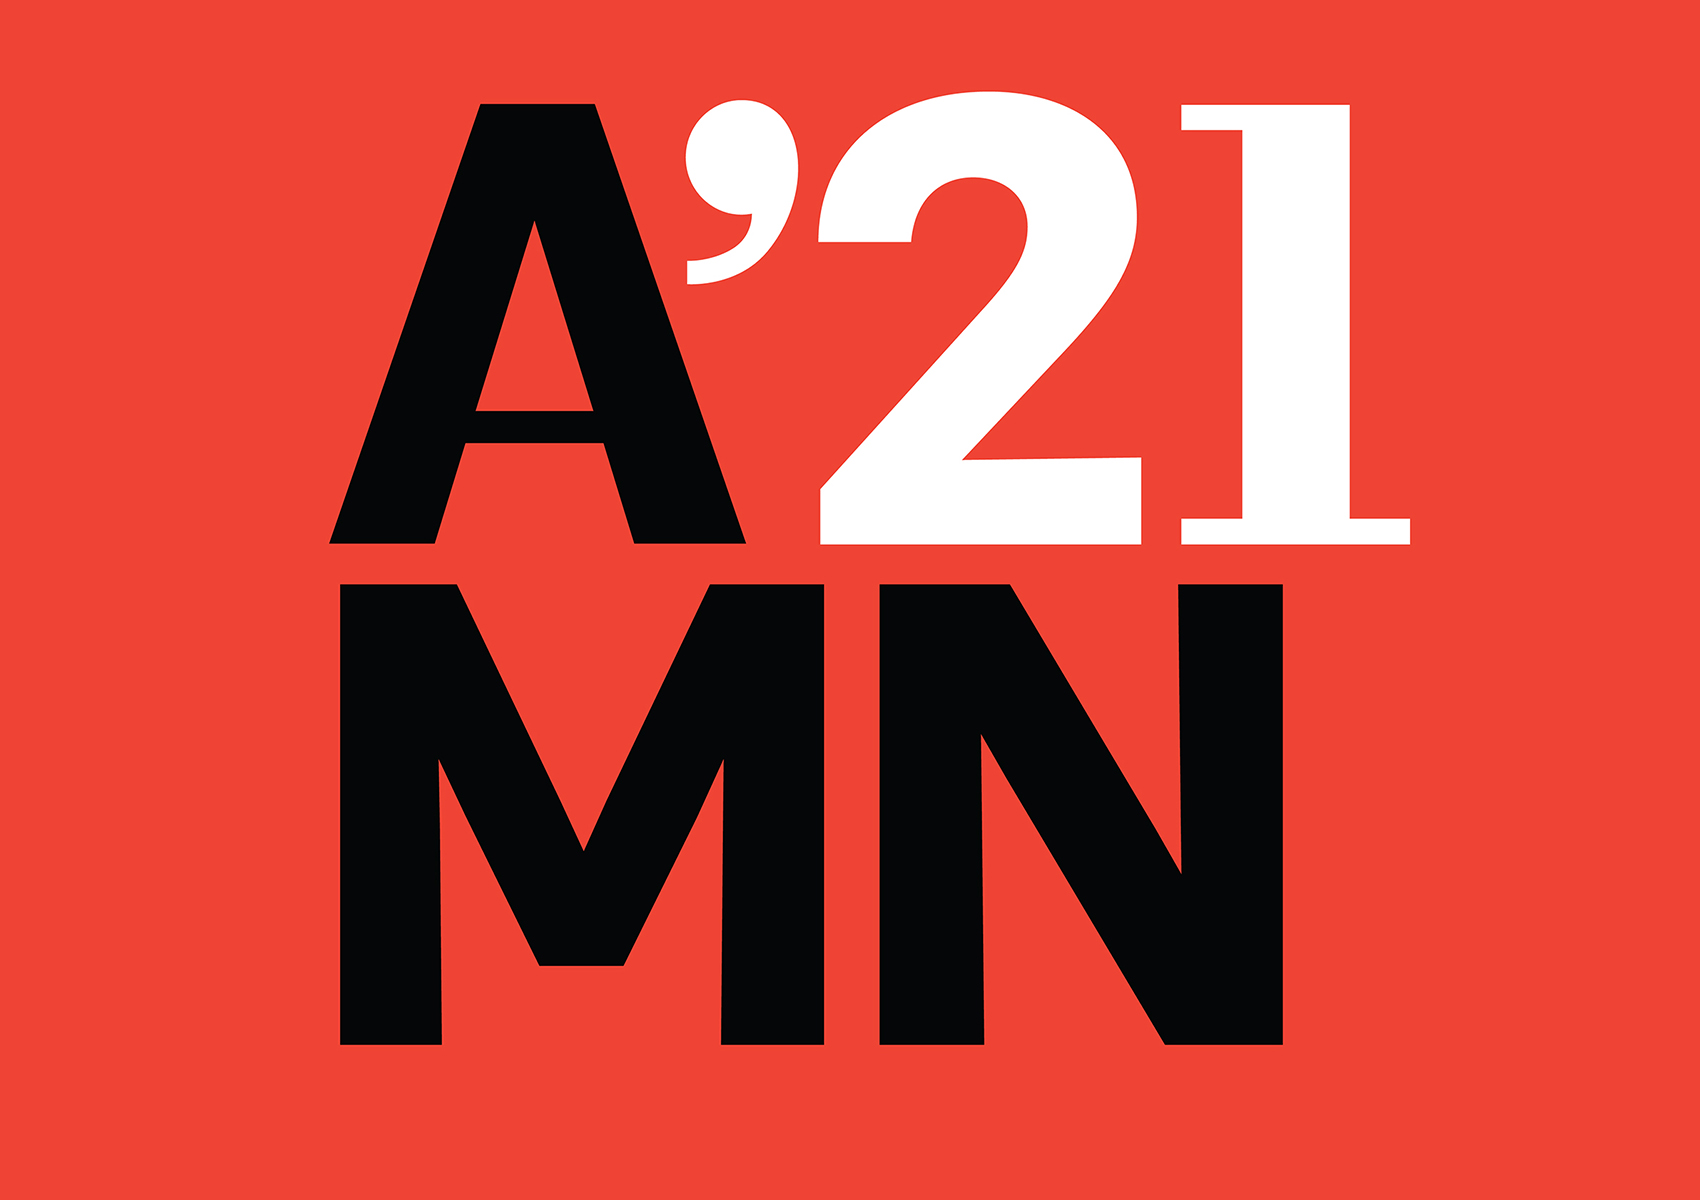 A’21 MN – The Minnesota Conference on Architecture: Day 4